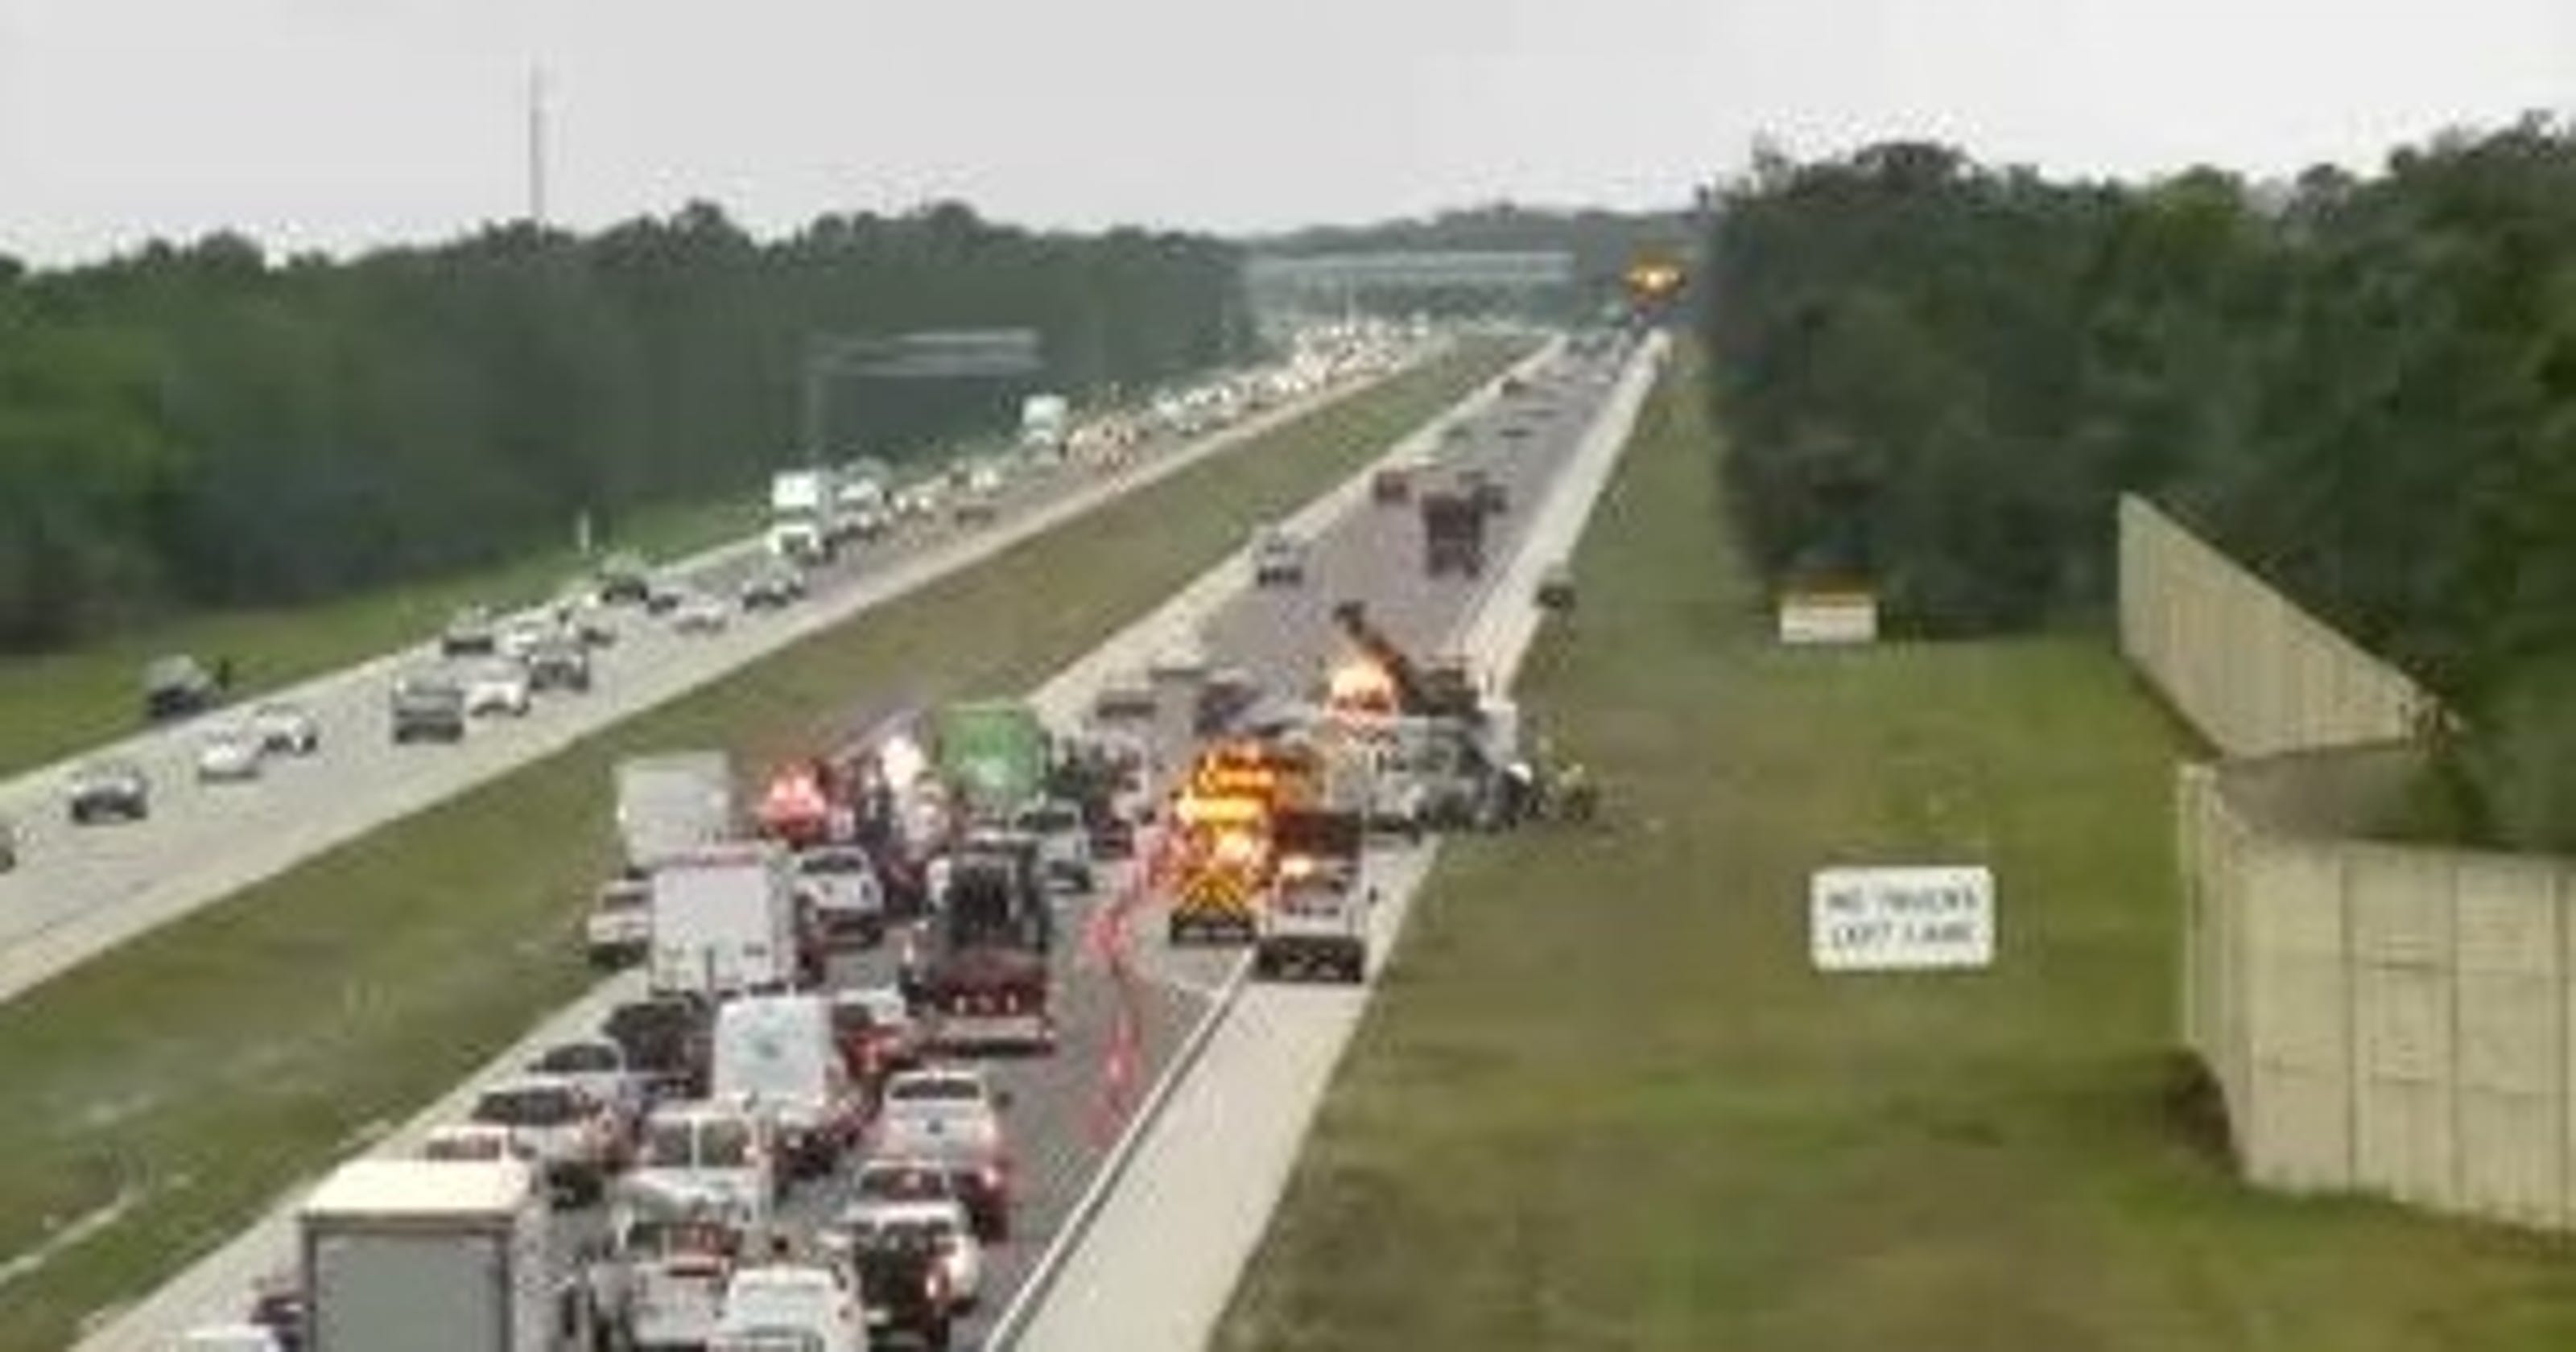 Crash on southbound Interstate 75 causes backup across all lanes